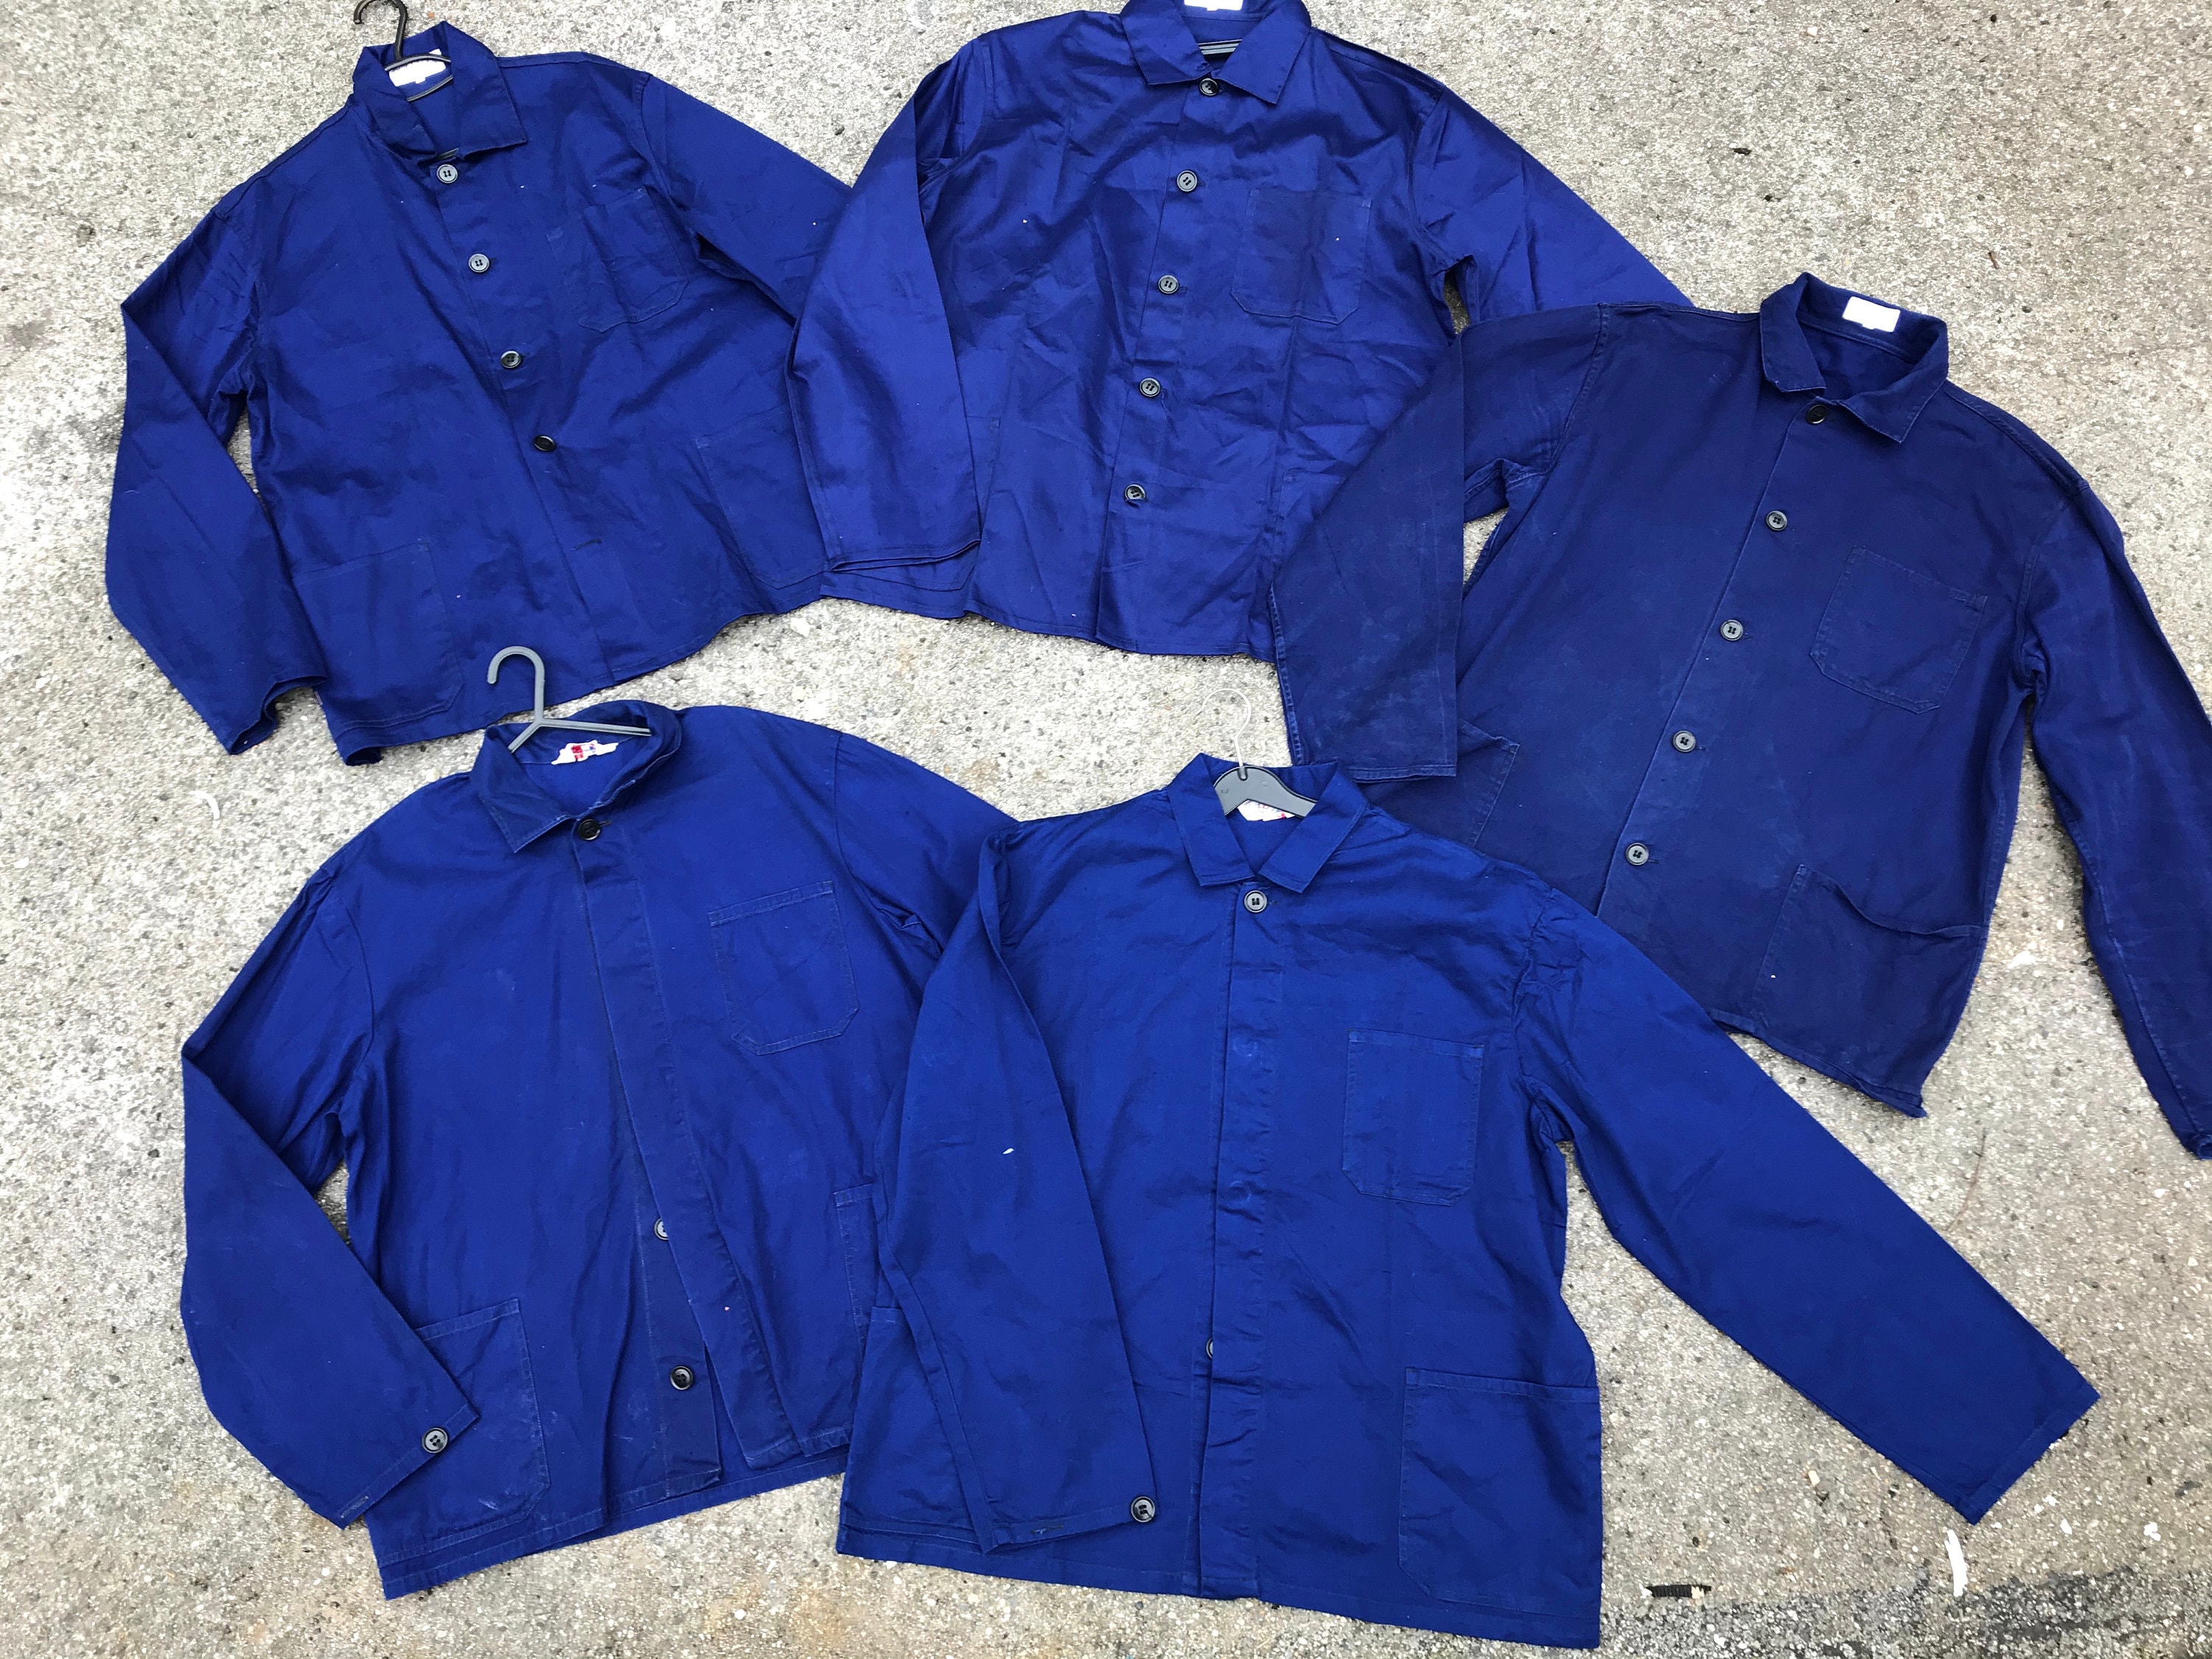 Vintage French Cotton Chore Worker Work Jackets Navy Blue S - Etsy